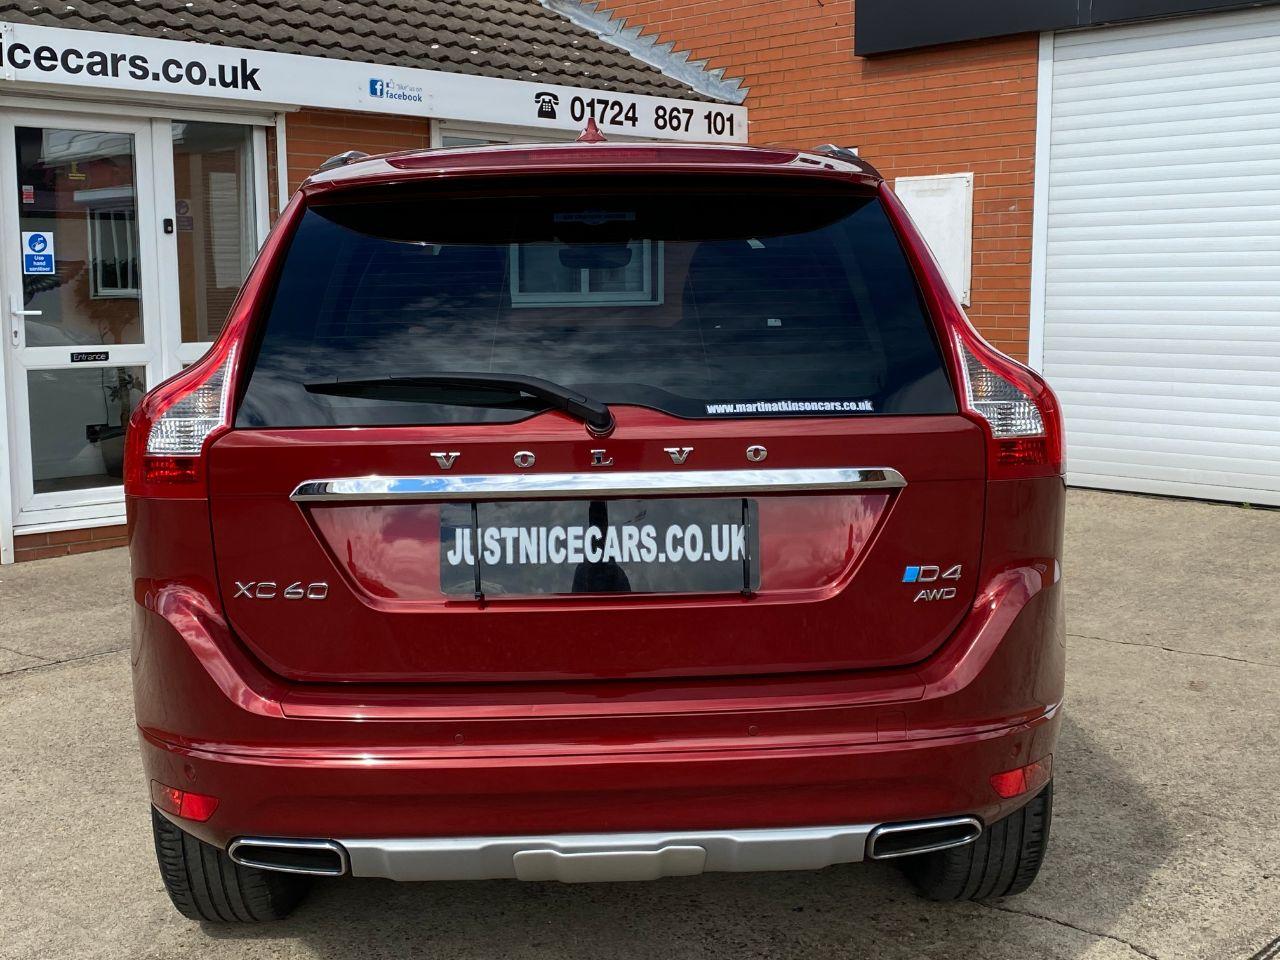 Volvo XC60 2.4 D4 SE Lux Nav 190BHP 5dr AWD Geartronic Automatic Estate Diesel Flamenco Red Metallic